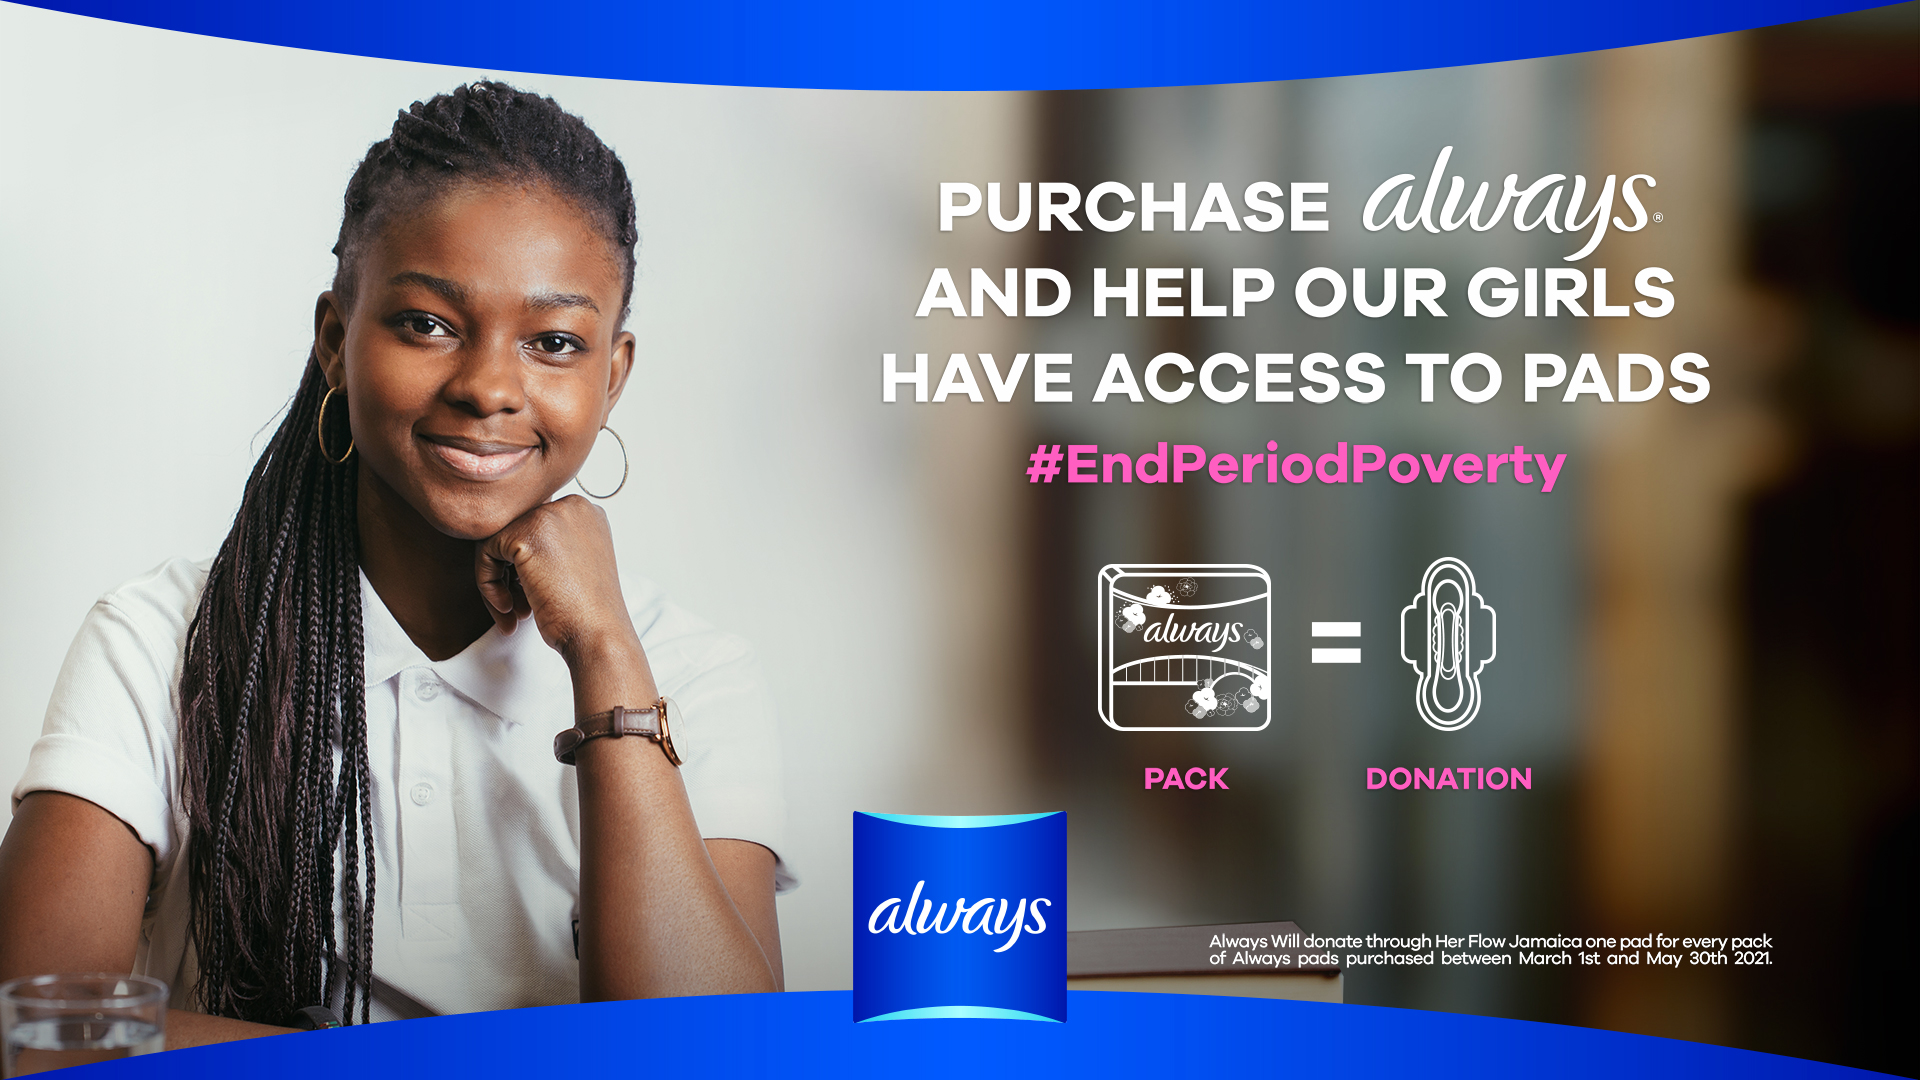 EmpowerHer Campaign seeks to empower women to 've access to sanitary pads